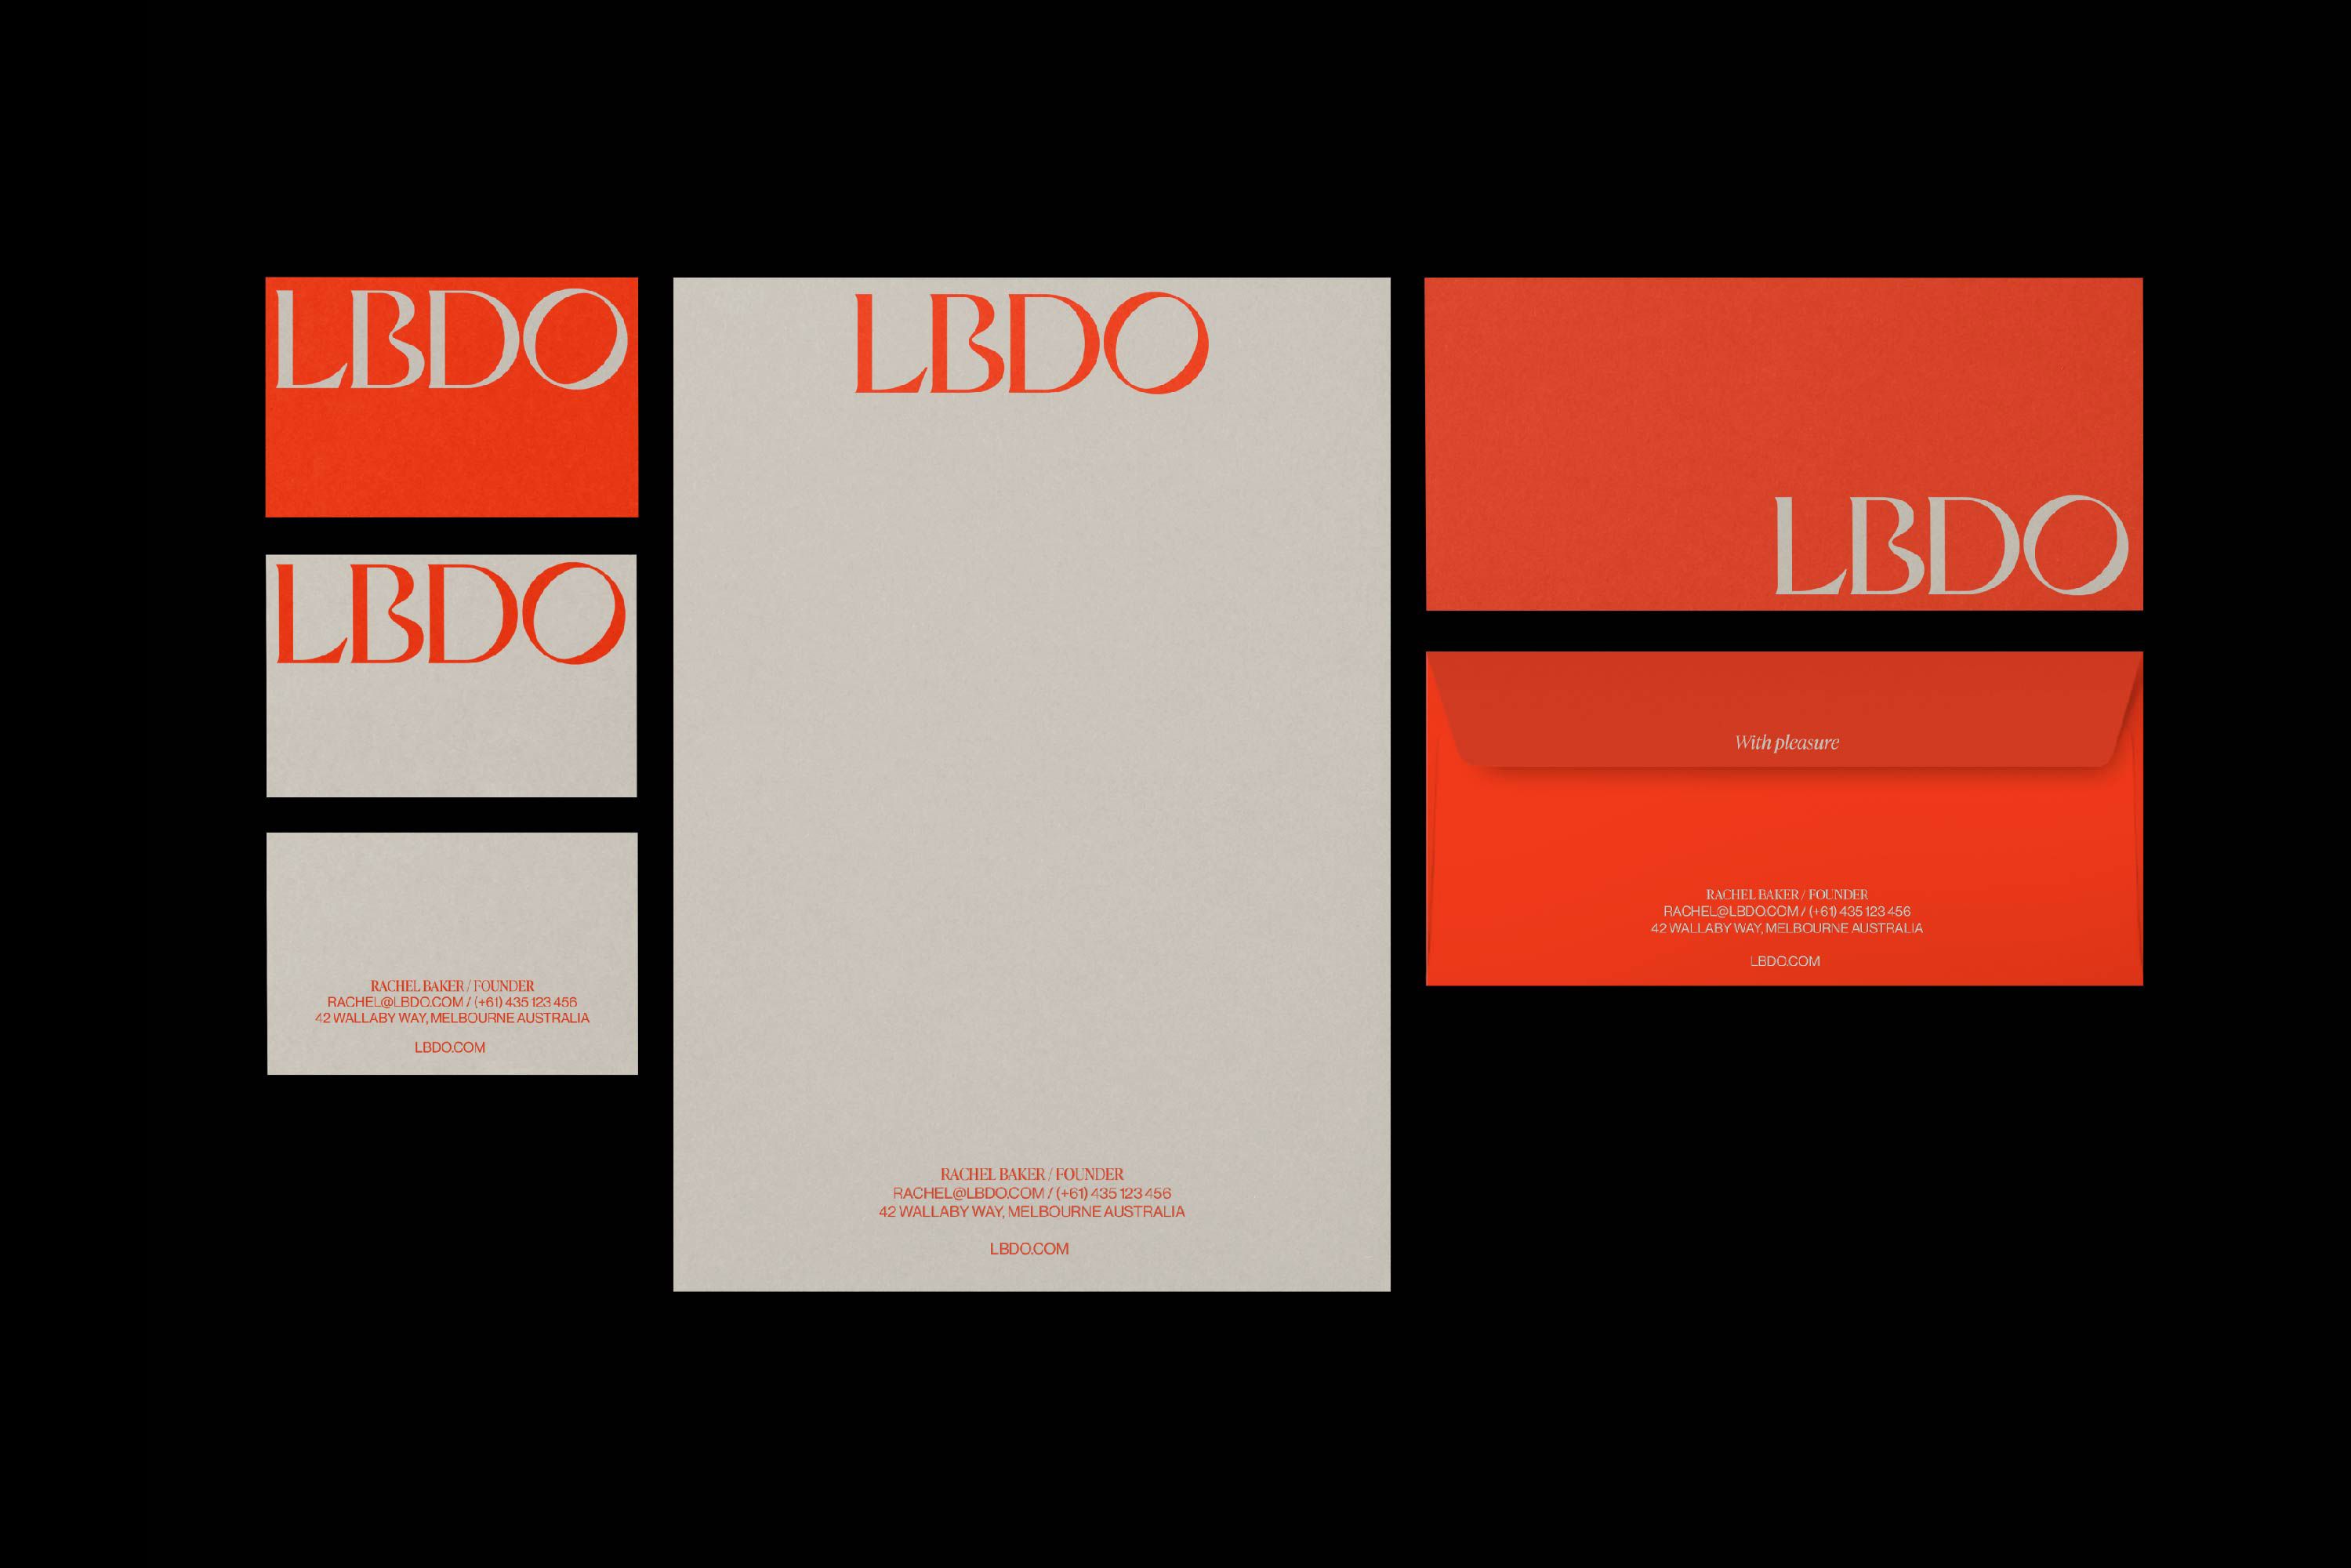 logo and corproate stationery for Australian sexual wellness brand LBDO designed by Universal Favourite